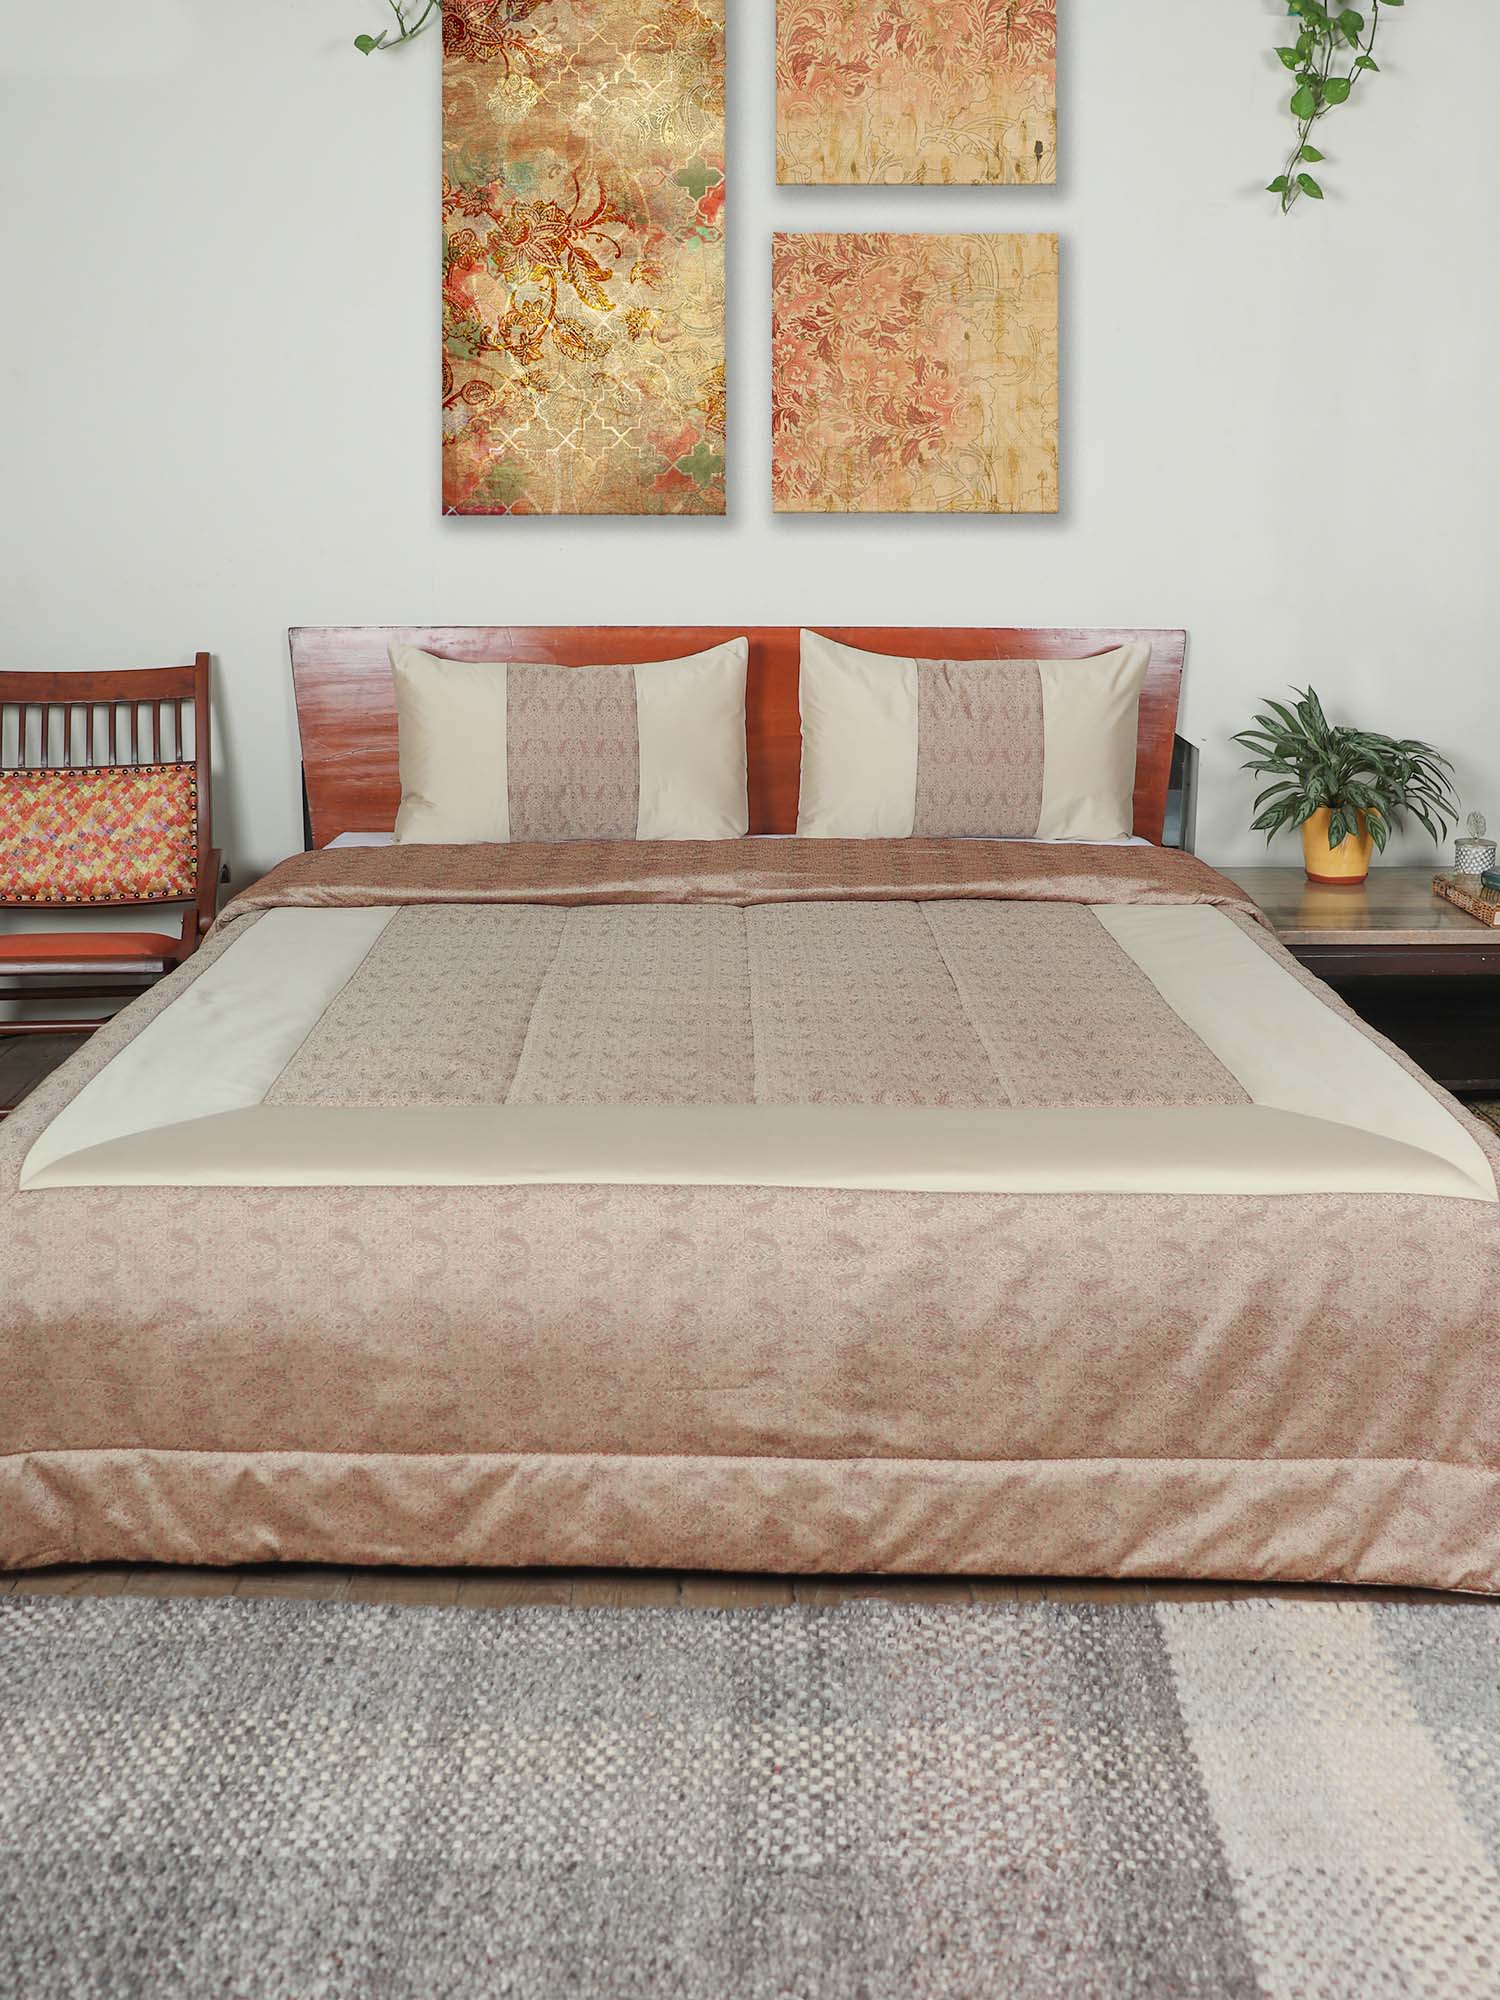 Quilt for Double Bed King Size | AC Comfortor/Blanket/Duvet, Lightweight | Brocade Silk Patchwork with 100% Cotton 300TC Backing Fabric - Golden Beige | 90x108+17x27 inches (228x274 cms)